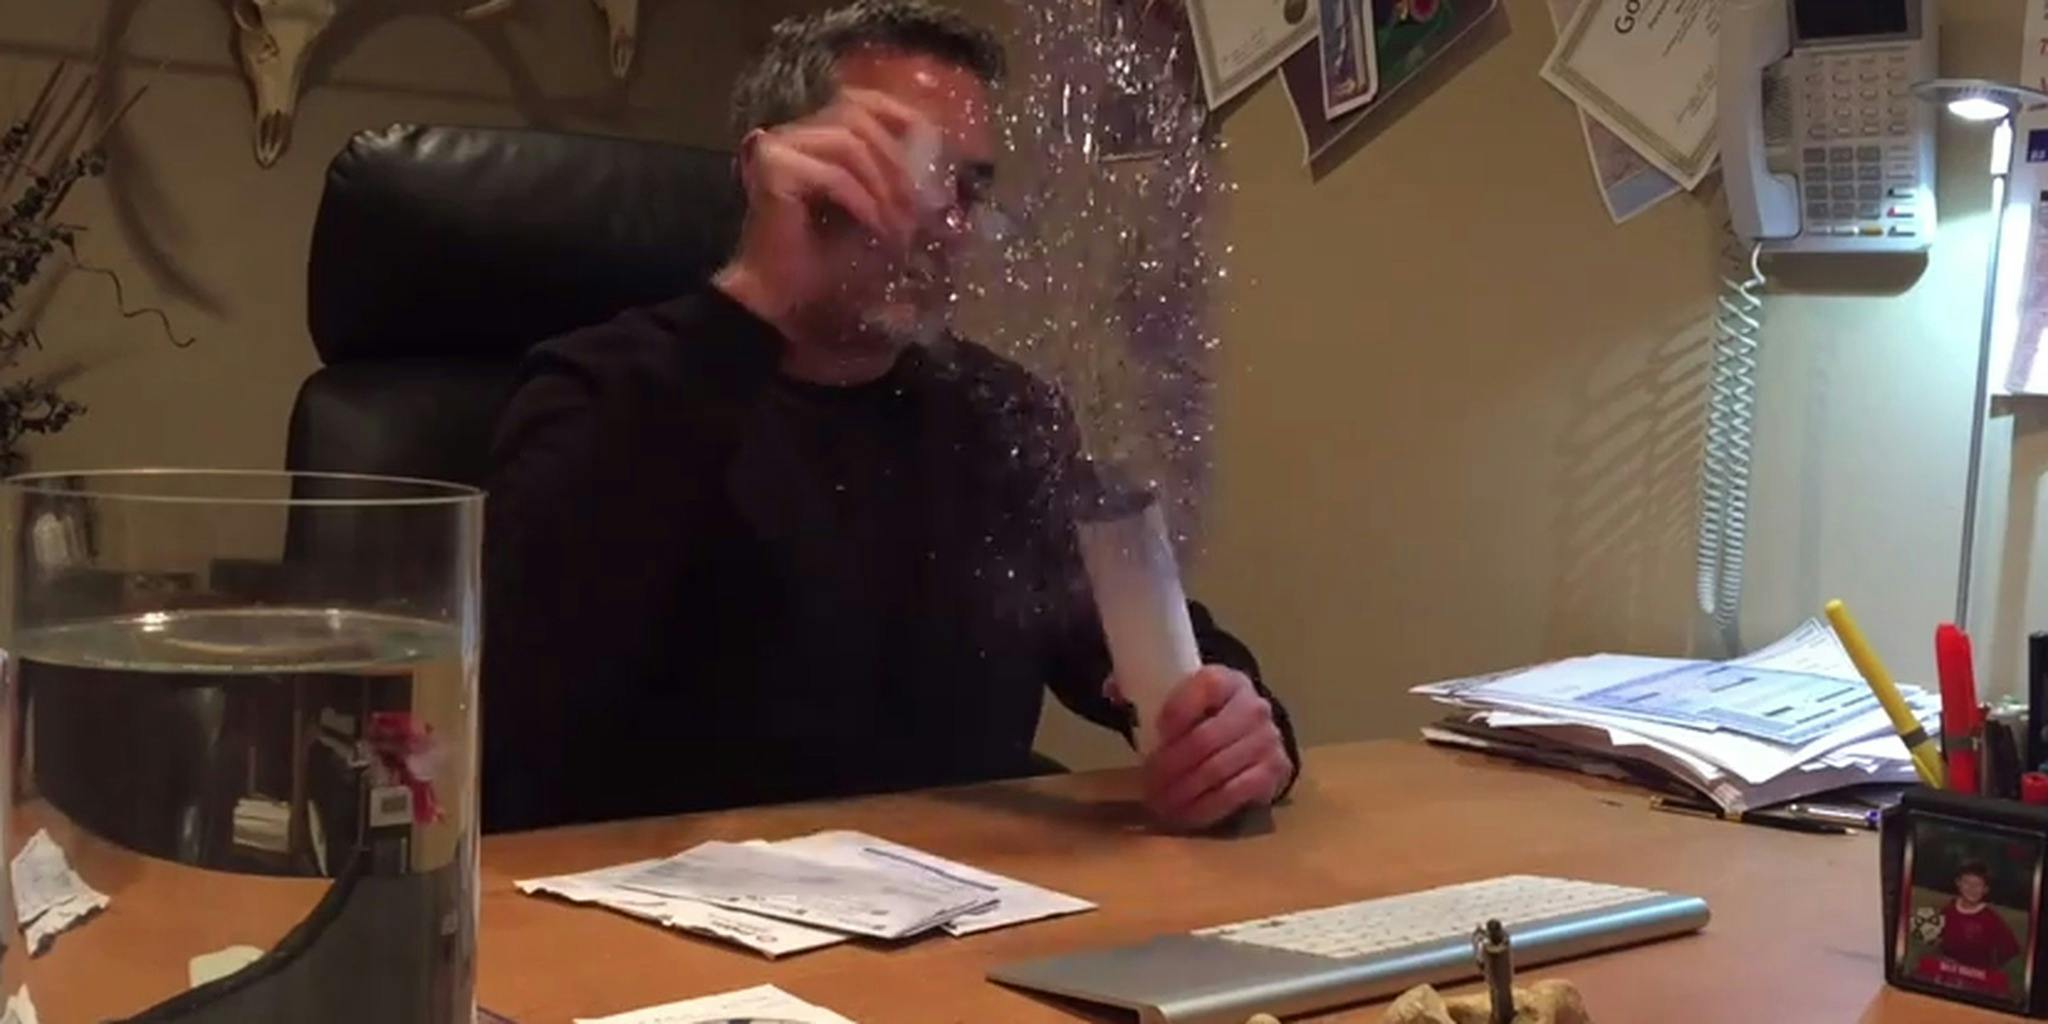 Datter Har lært Rend Here's what it's actually like to open a glitter bomb - The Daily Dot